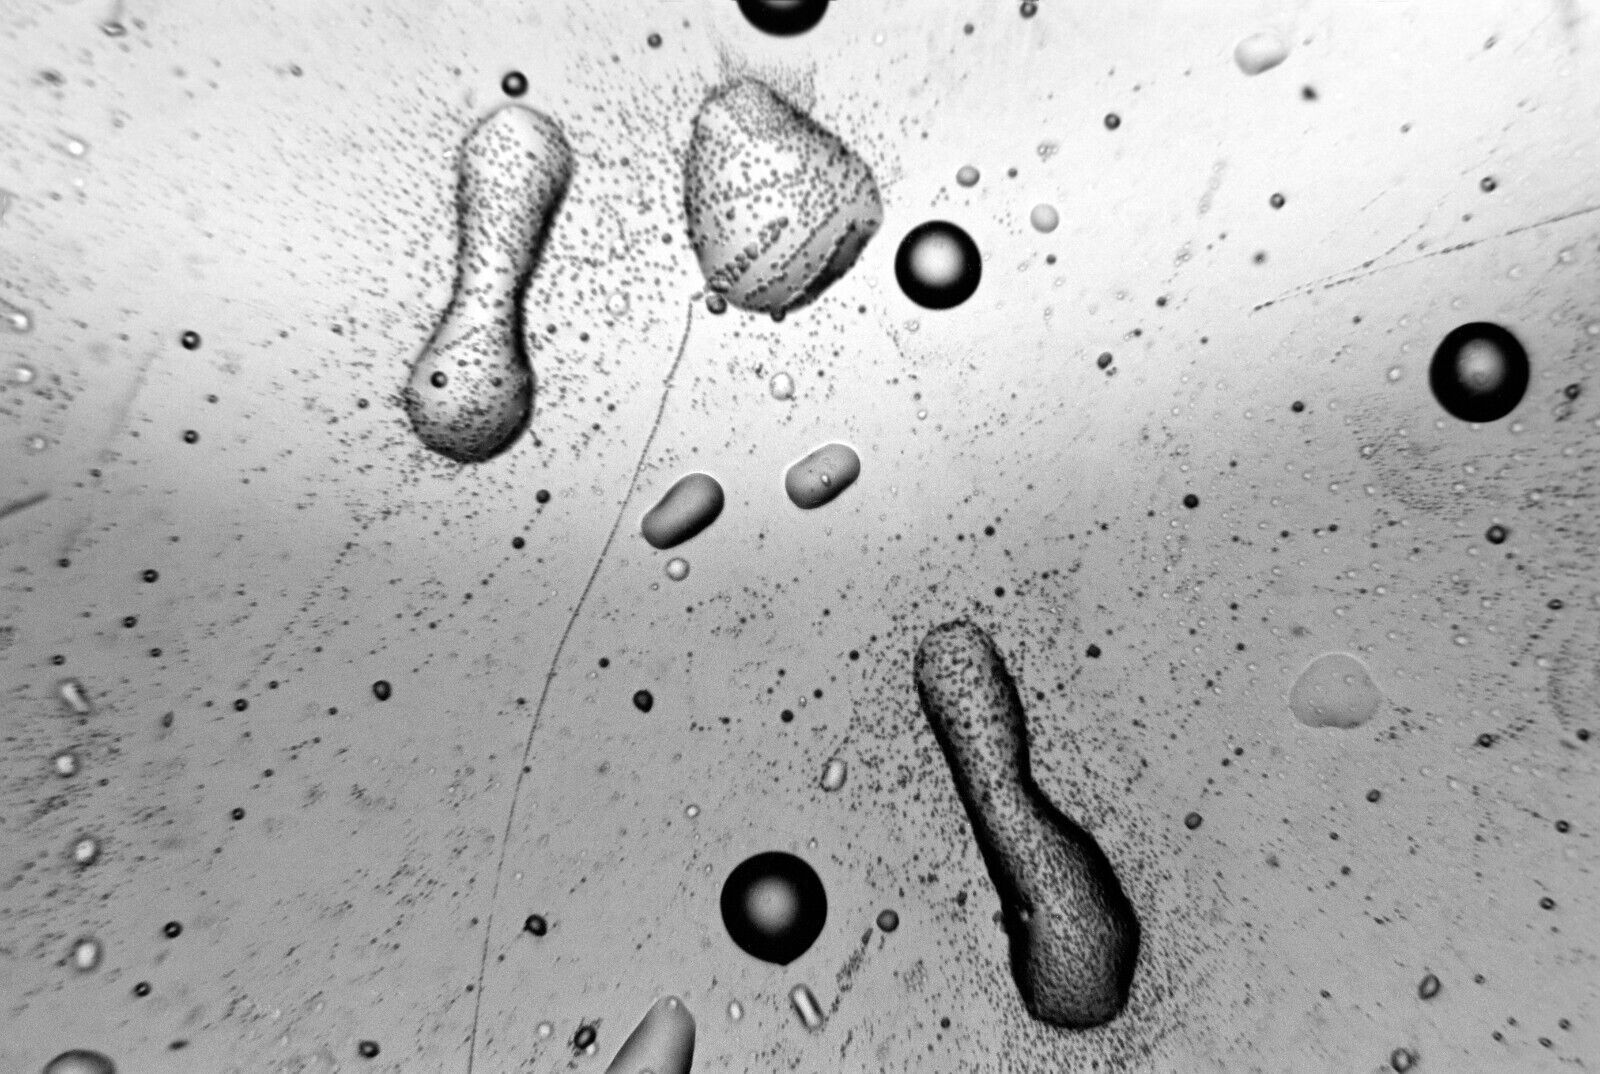 Abstract Micrograph Aquatic Organisms Spore 35 mm B&W Negative 1970s Jerry Sims